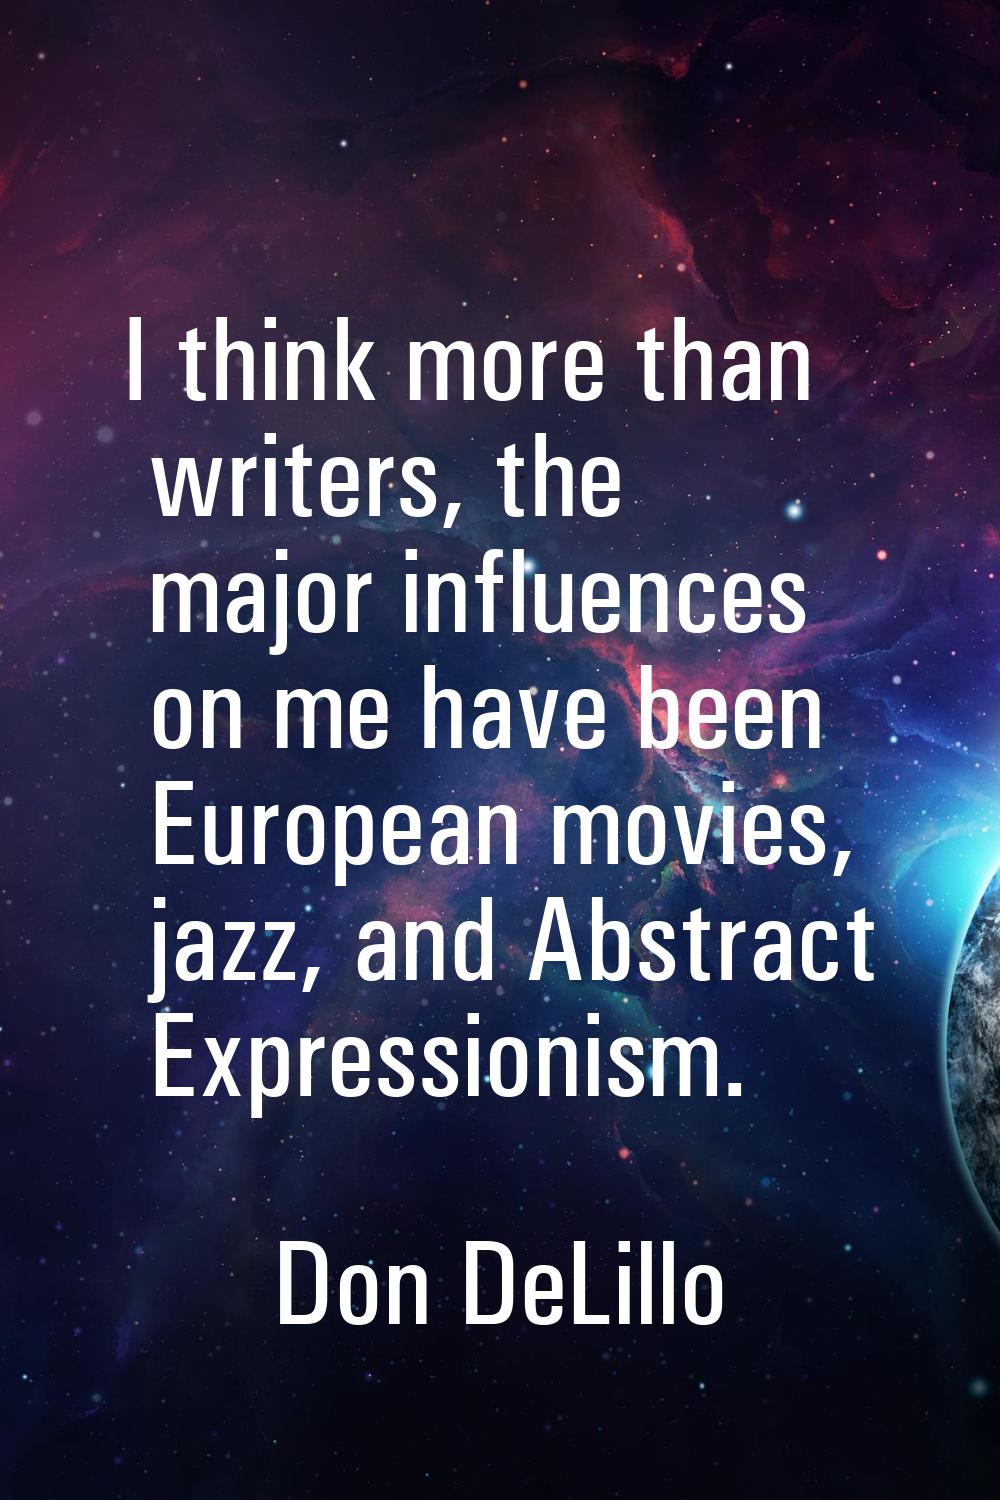 I think more than writers, the major influences on me have been European movies, jazz, and Abstract